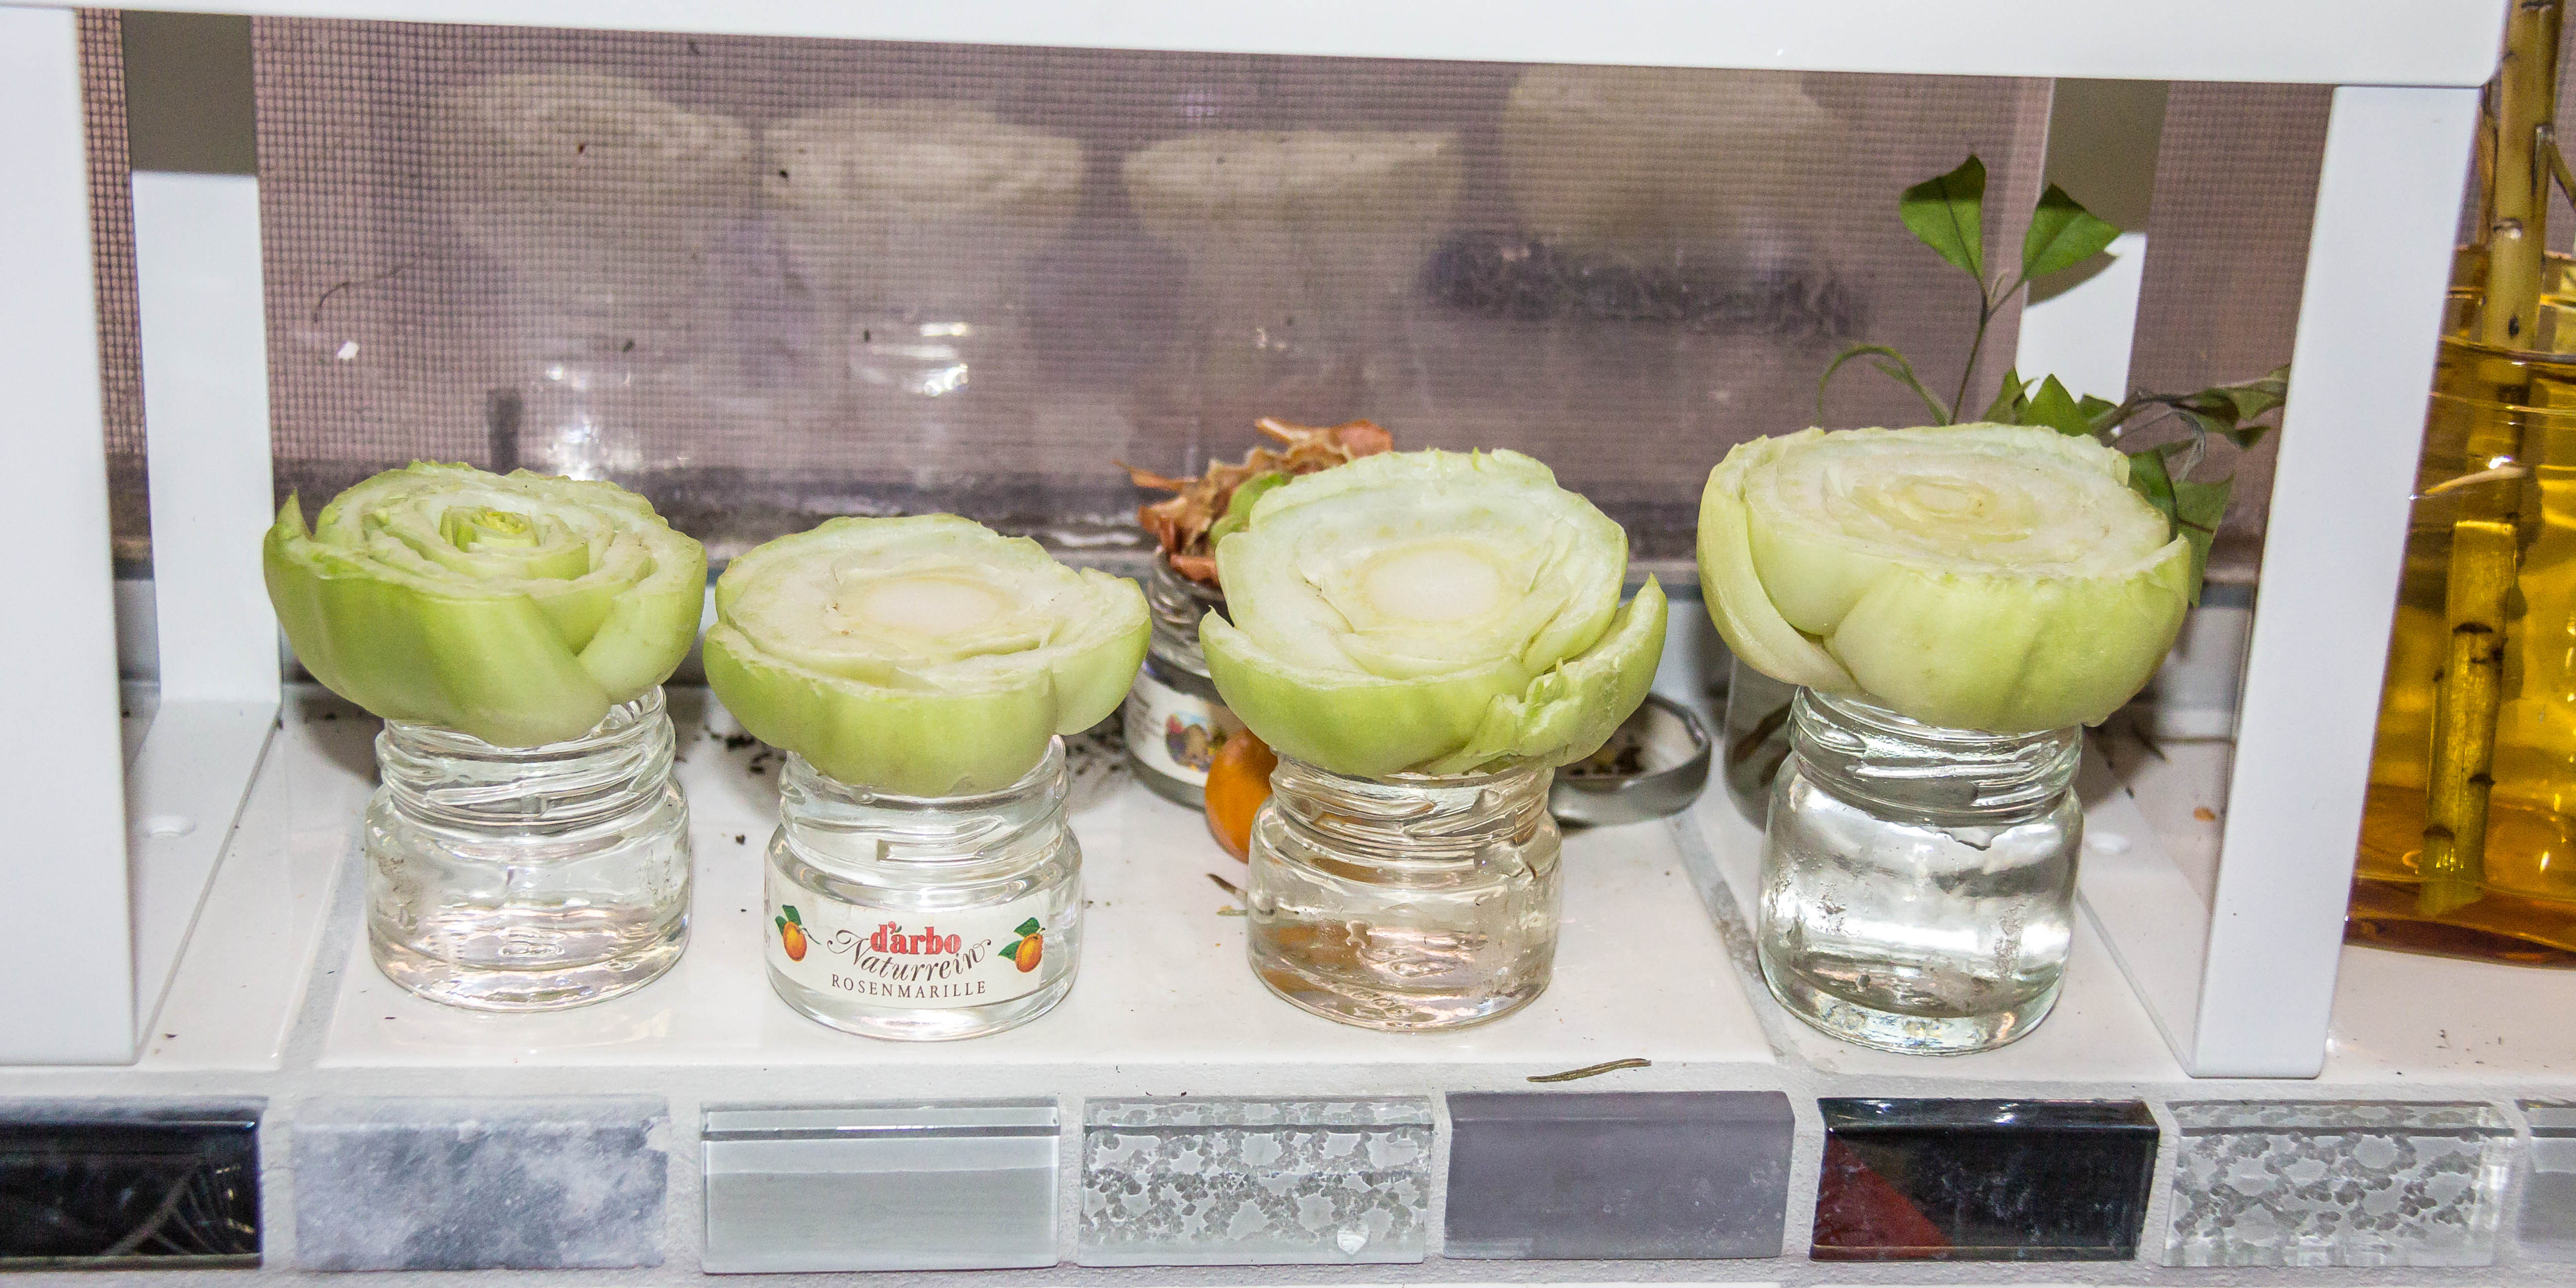 15/05/15 Day 1 Just bought the bok choy and chopped off the bottom bit to re-grow suspended in little glass jars